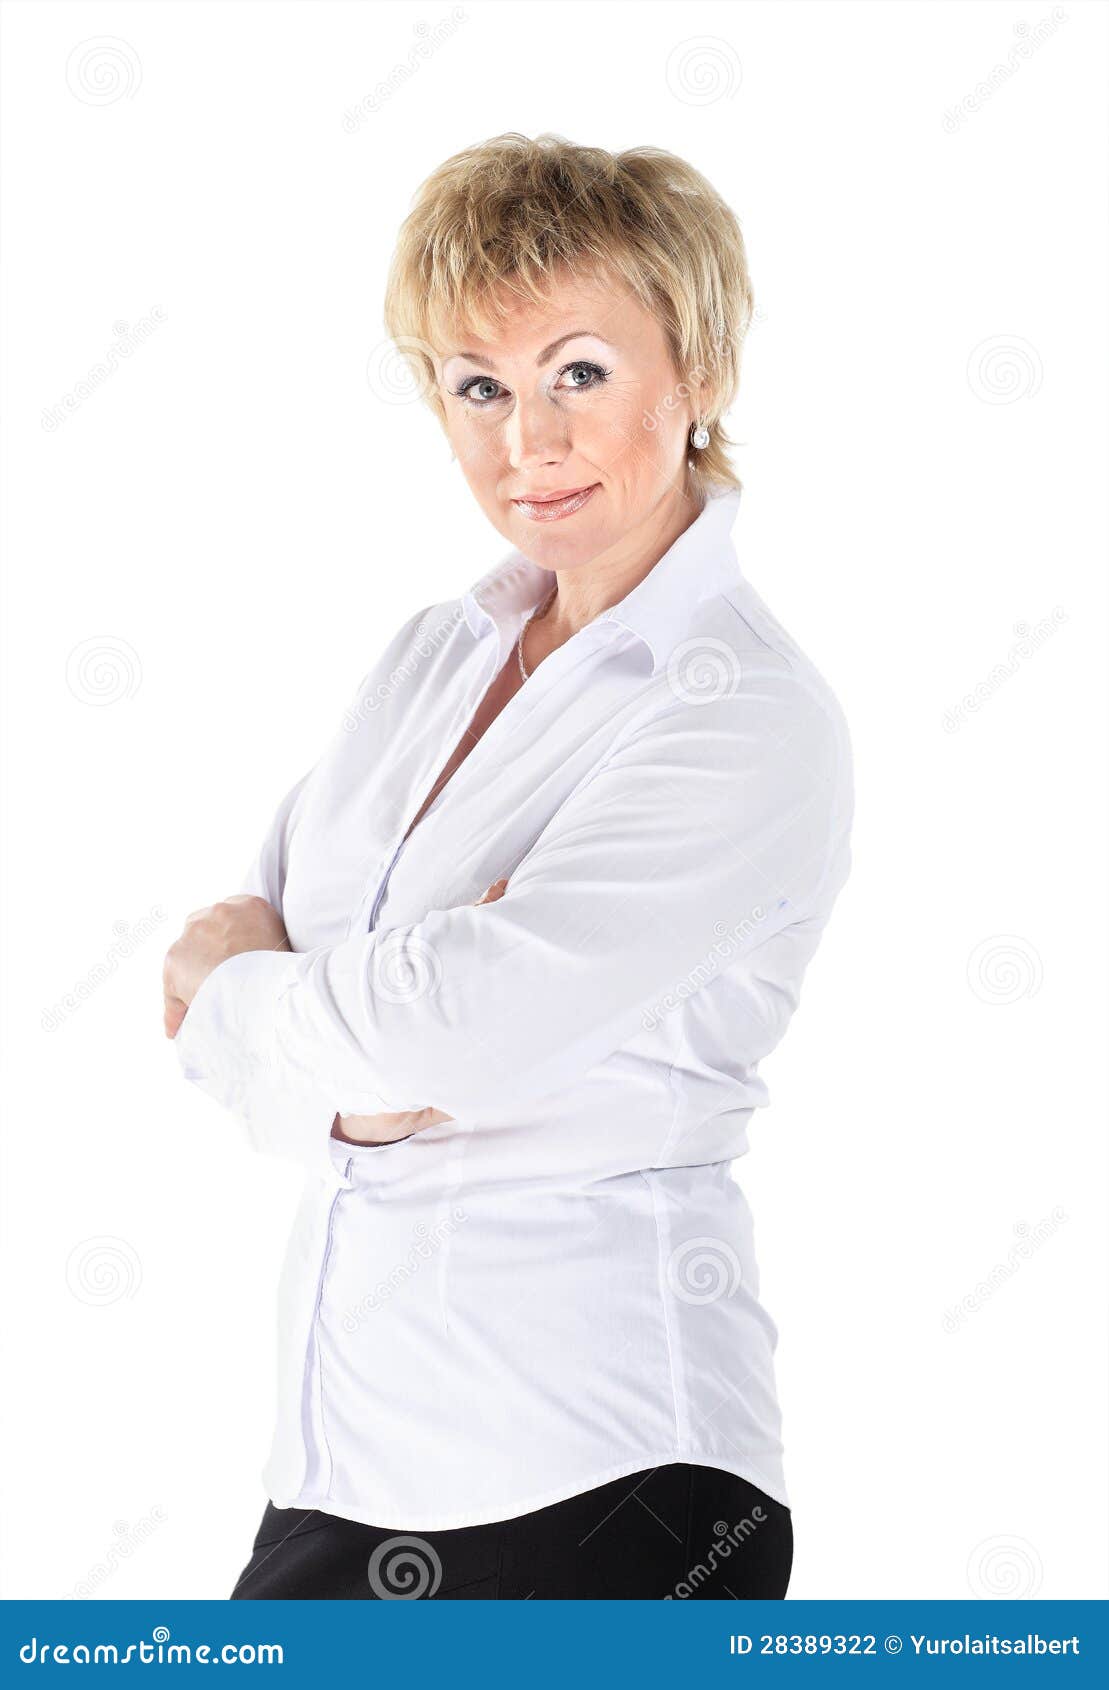 Business Woman In Her 40s Stock Photography - Image: 28389322